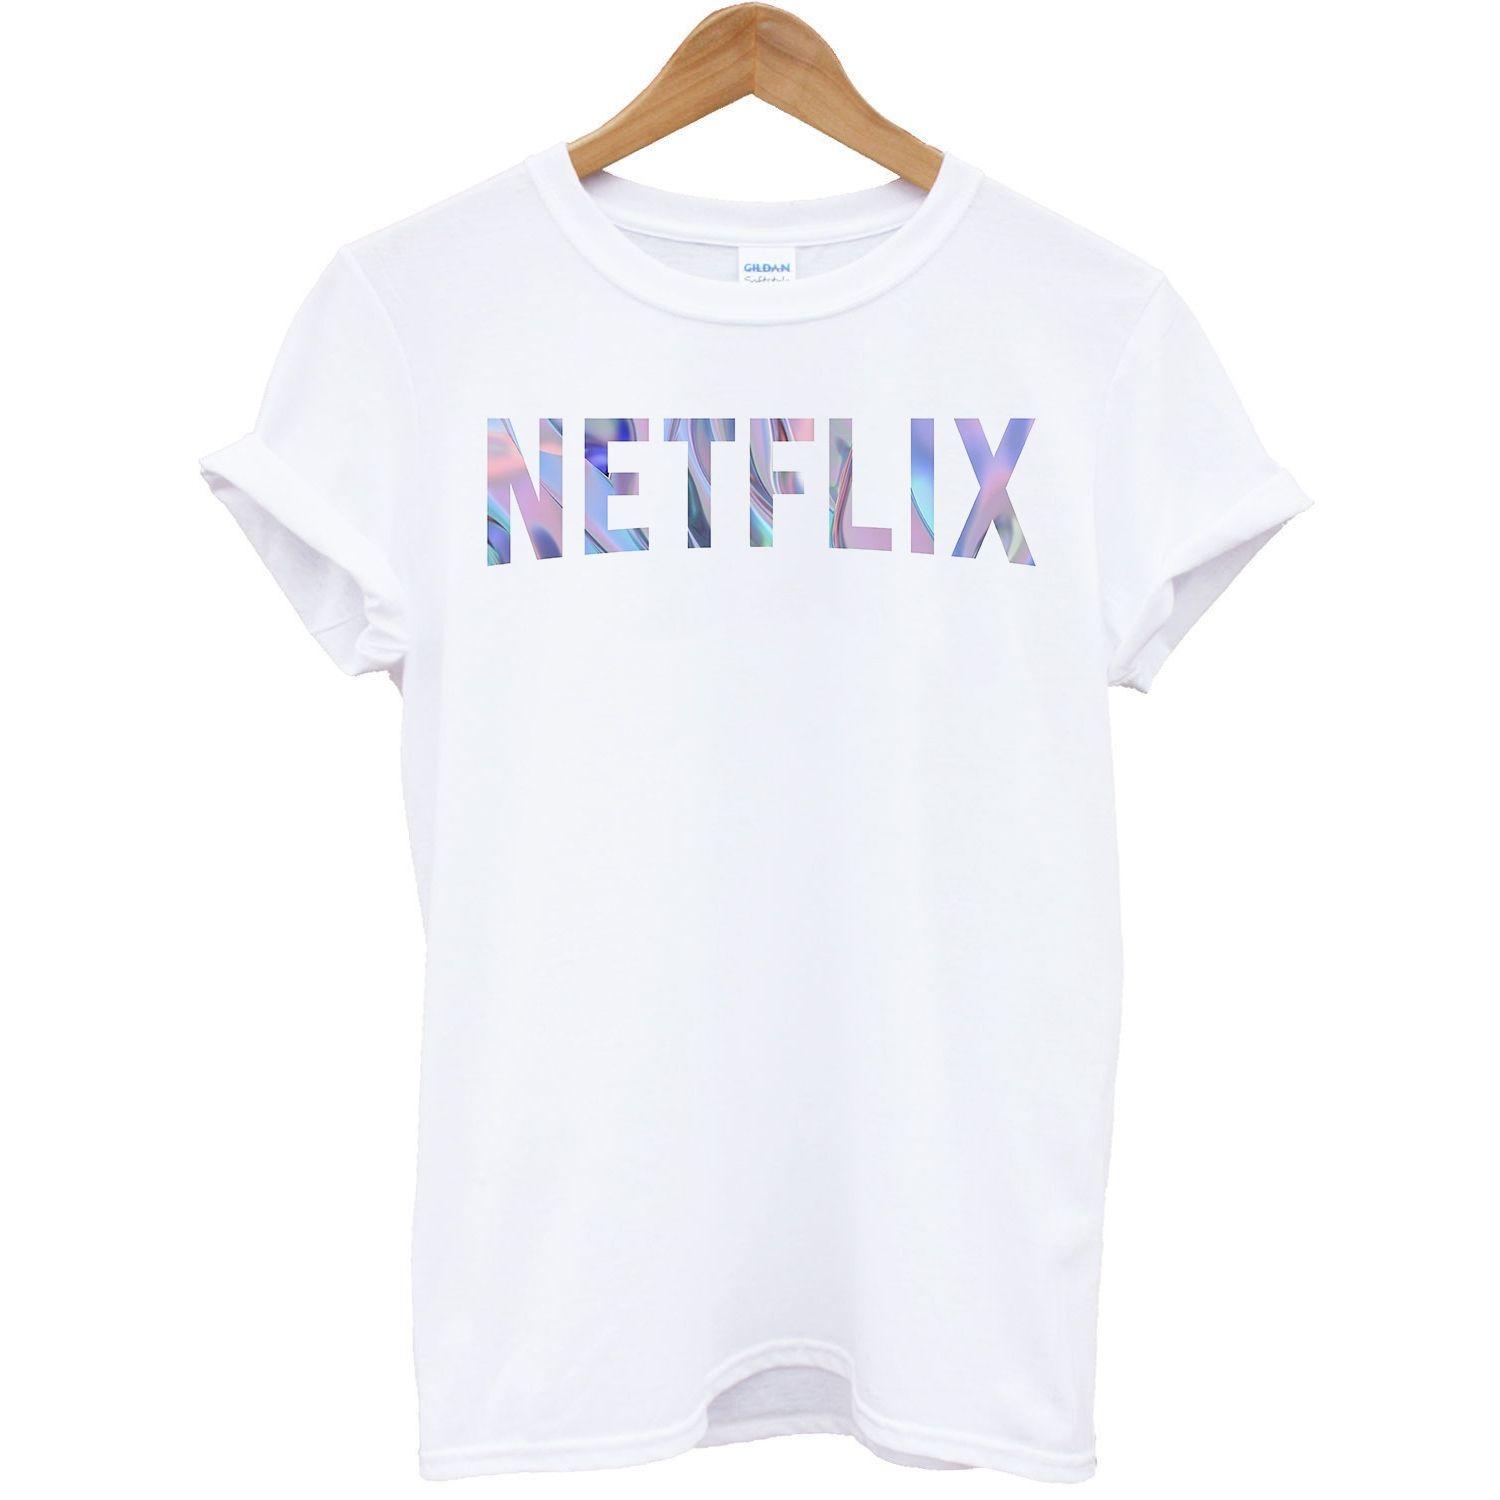 Small Netflix Logo - Our Pink Netflix Logo T Shirt Is Available Online Now For Just